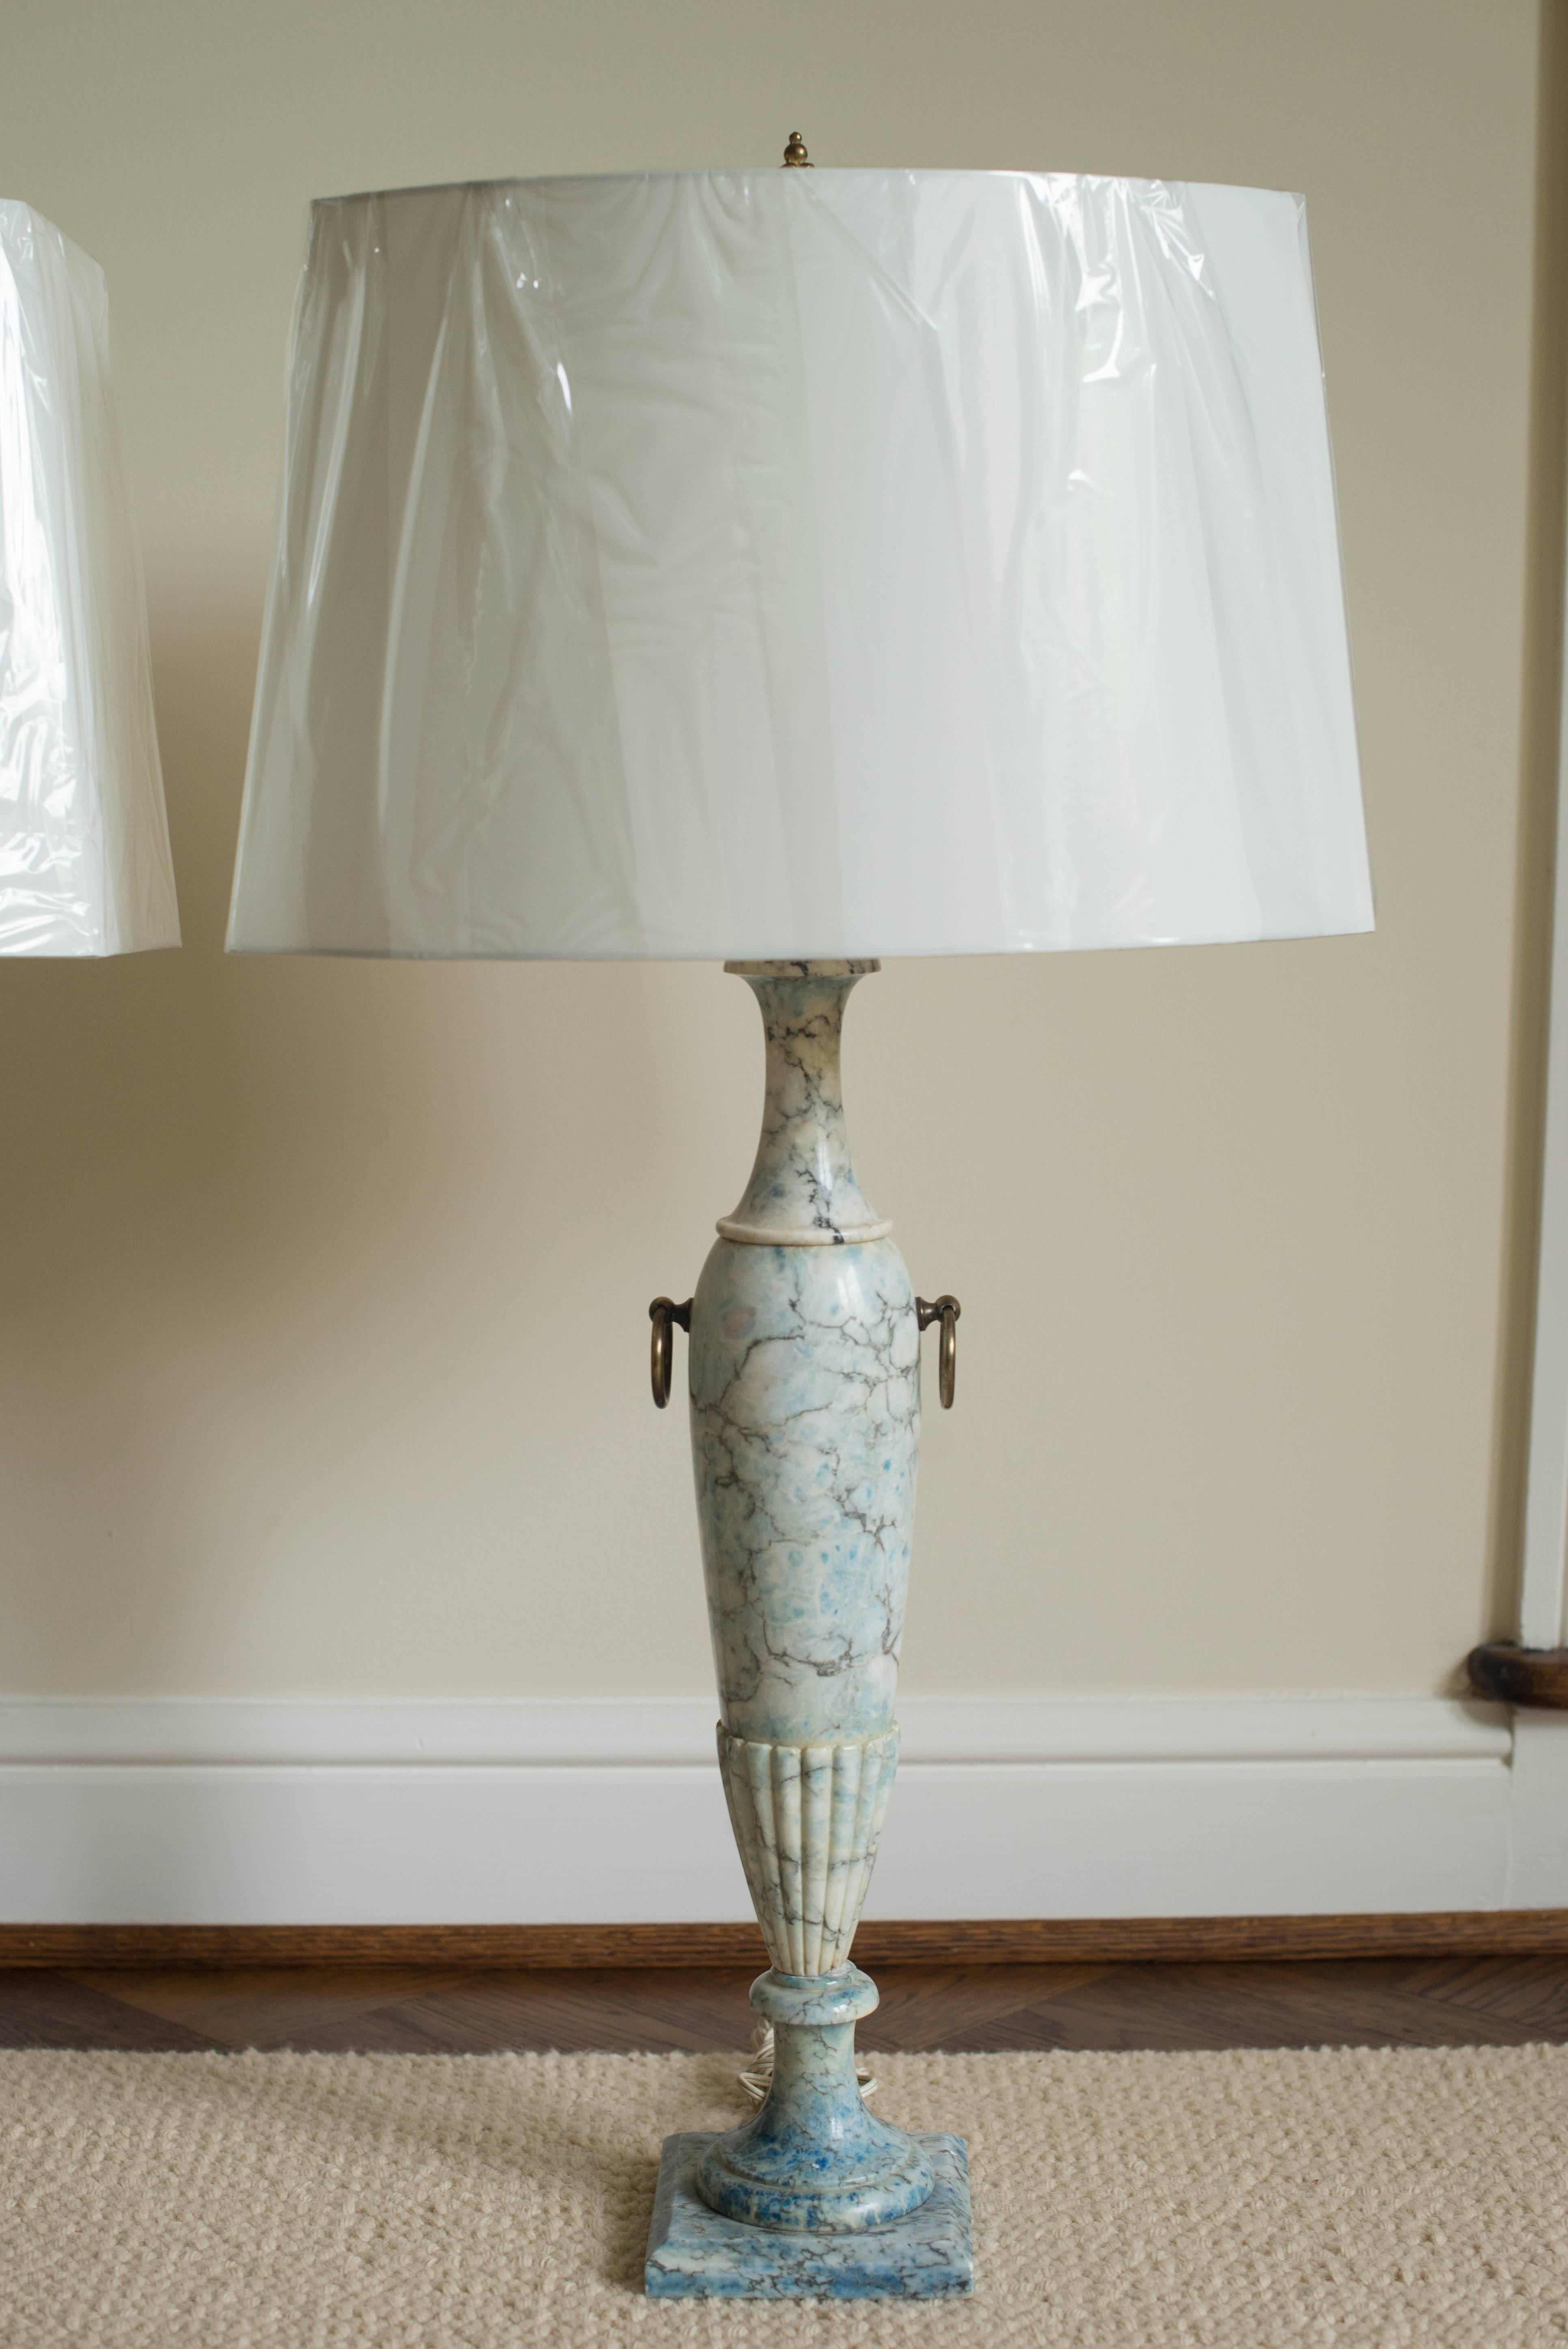 This fabulous pair of Midcentury carved blue marble table lamps comes with the new silk shades and brass finials shown in the photos. The blue marble is highly unusual but perfect for today's color trends and decor. The height of the lamps is 25.5